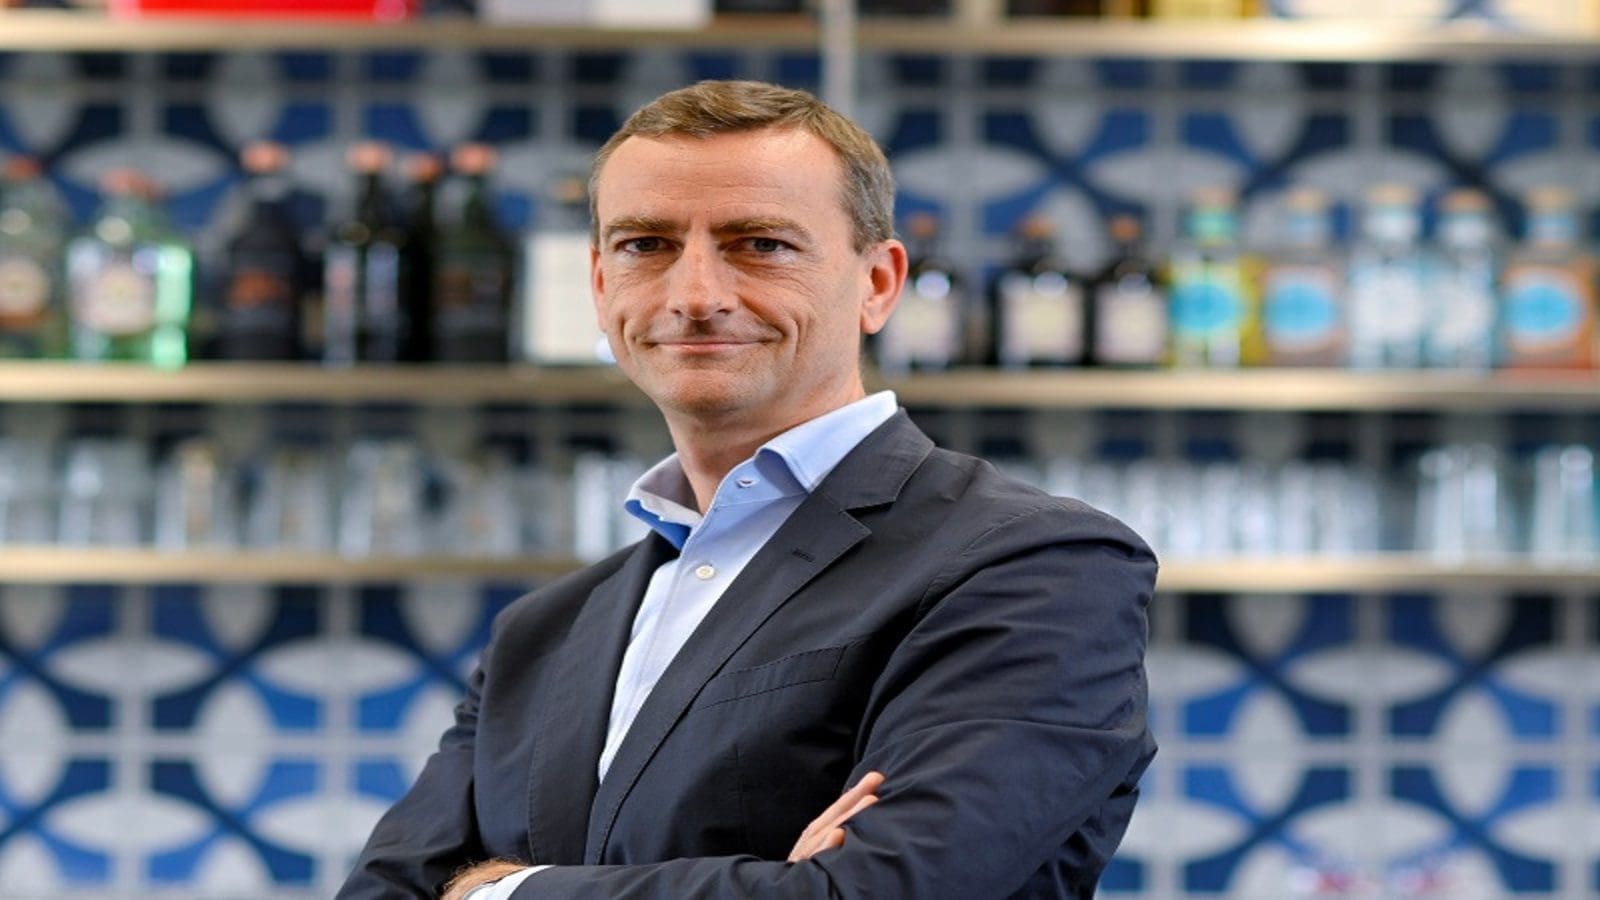 Pernod Ricard India appoints Paul-Robert Bouhier as new CEO amid US$244m tax dispute with Indian authorities